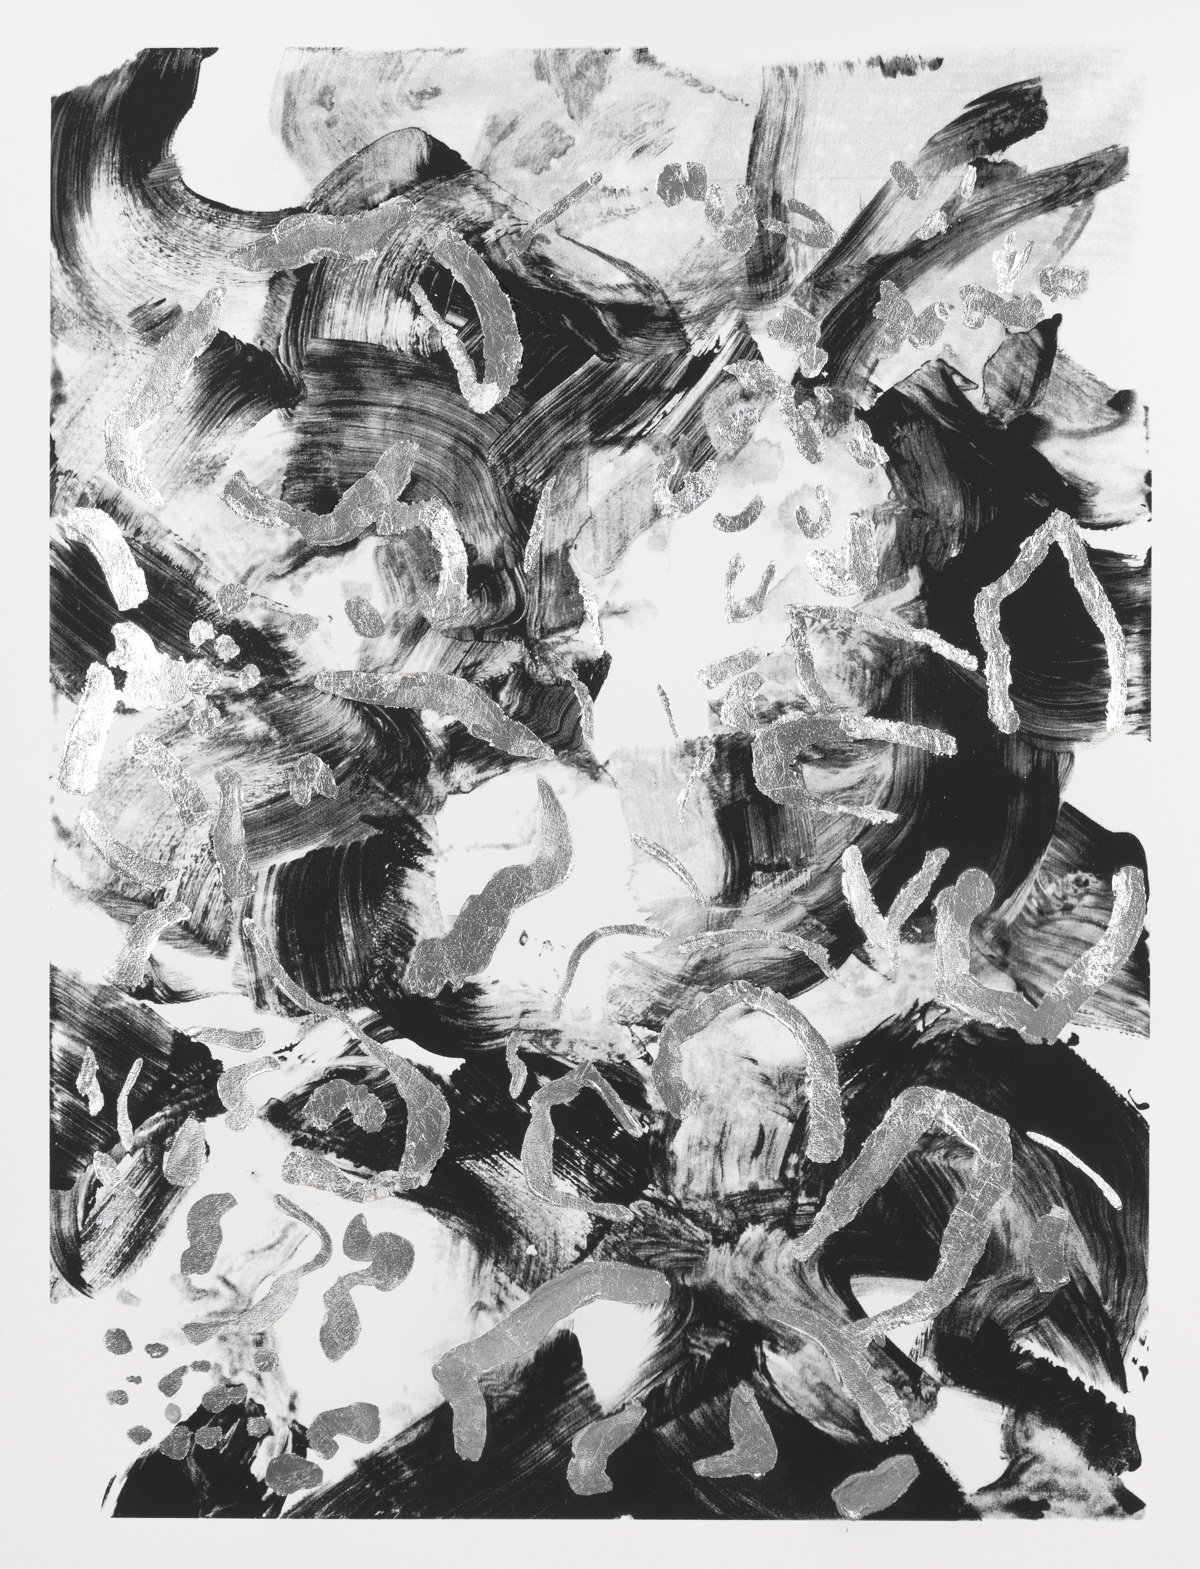 BECOMING SOMEONE ELSE: ALUMINUM (MONOPRINT), 2023, Aluminum leaf, paper monoprint (black), 40 x 30 inches, labeled “M.P.,” signed, and dated, unframed